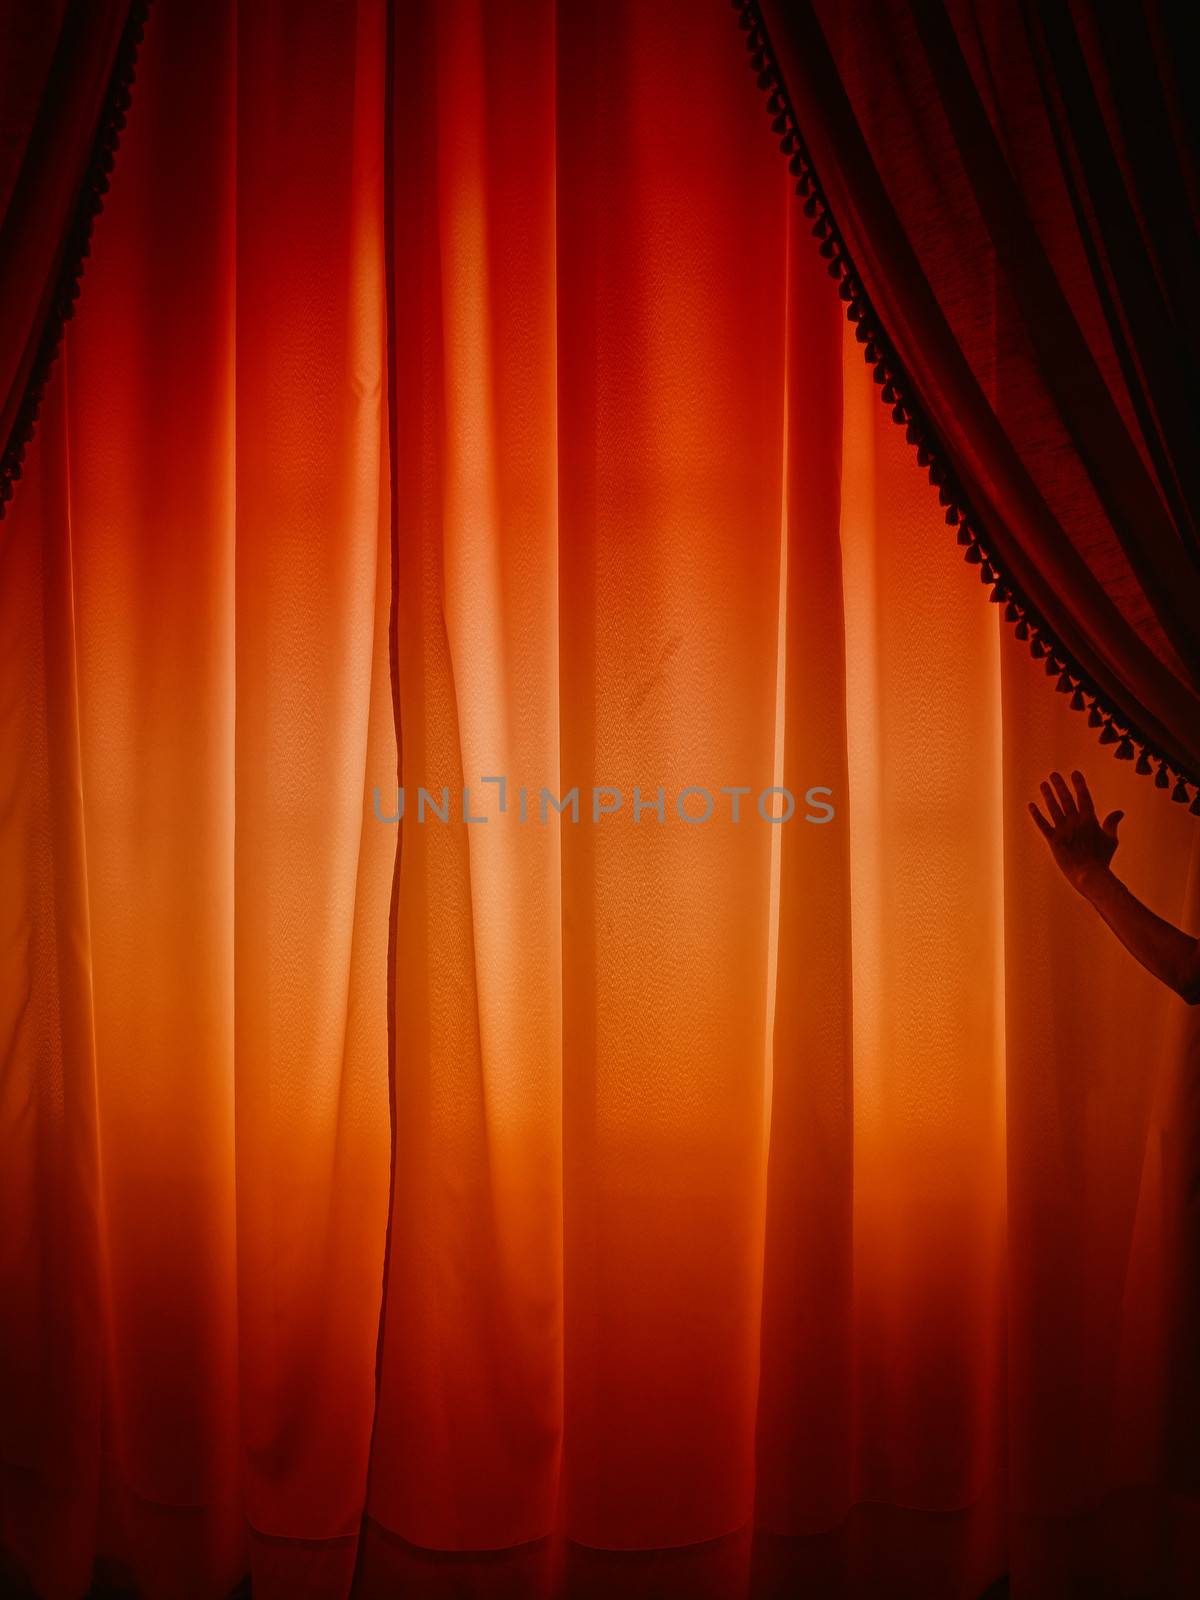 Behind the curtain by ABCDK